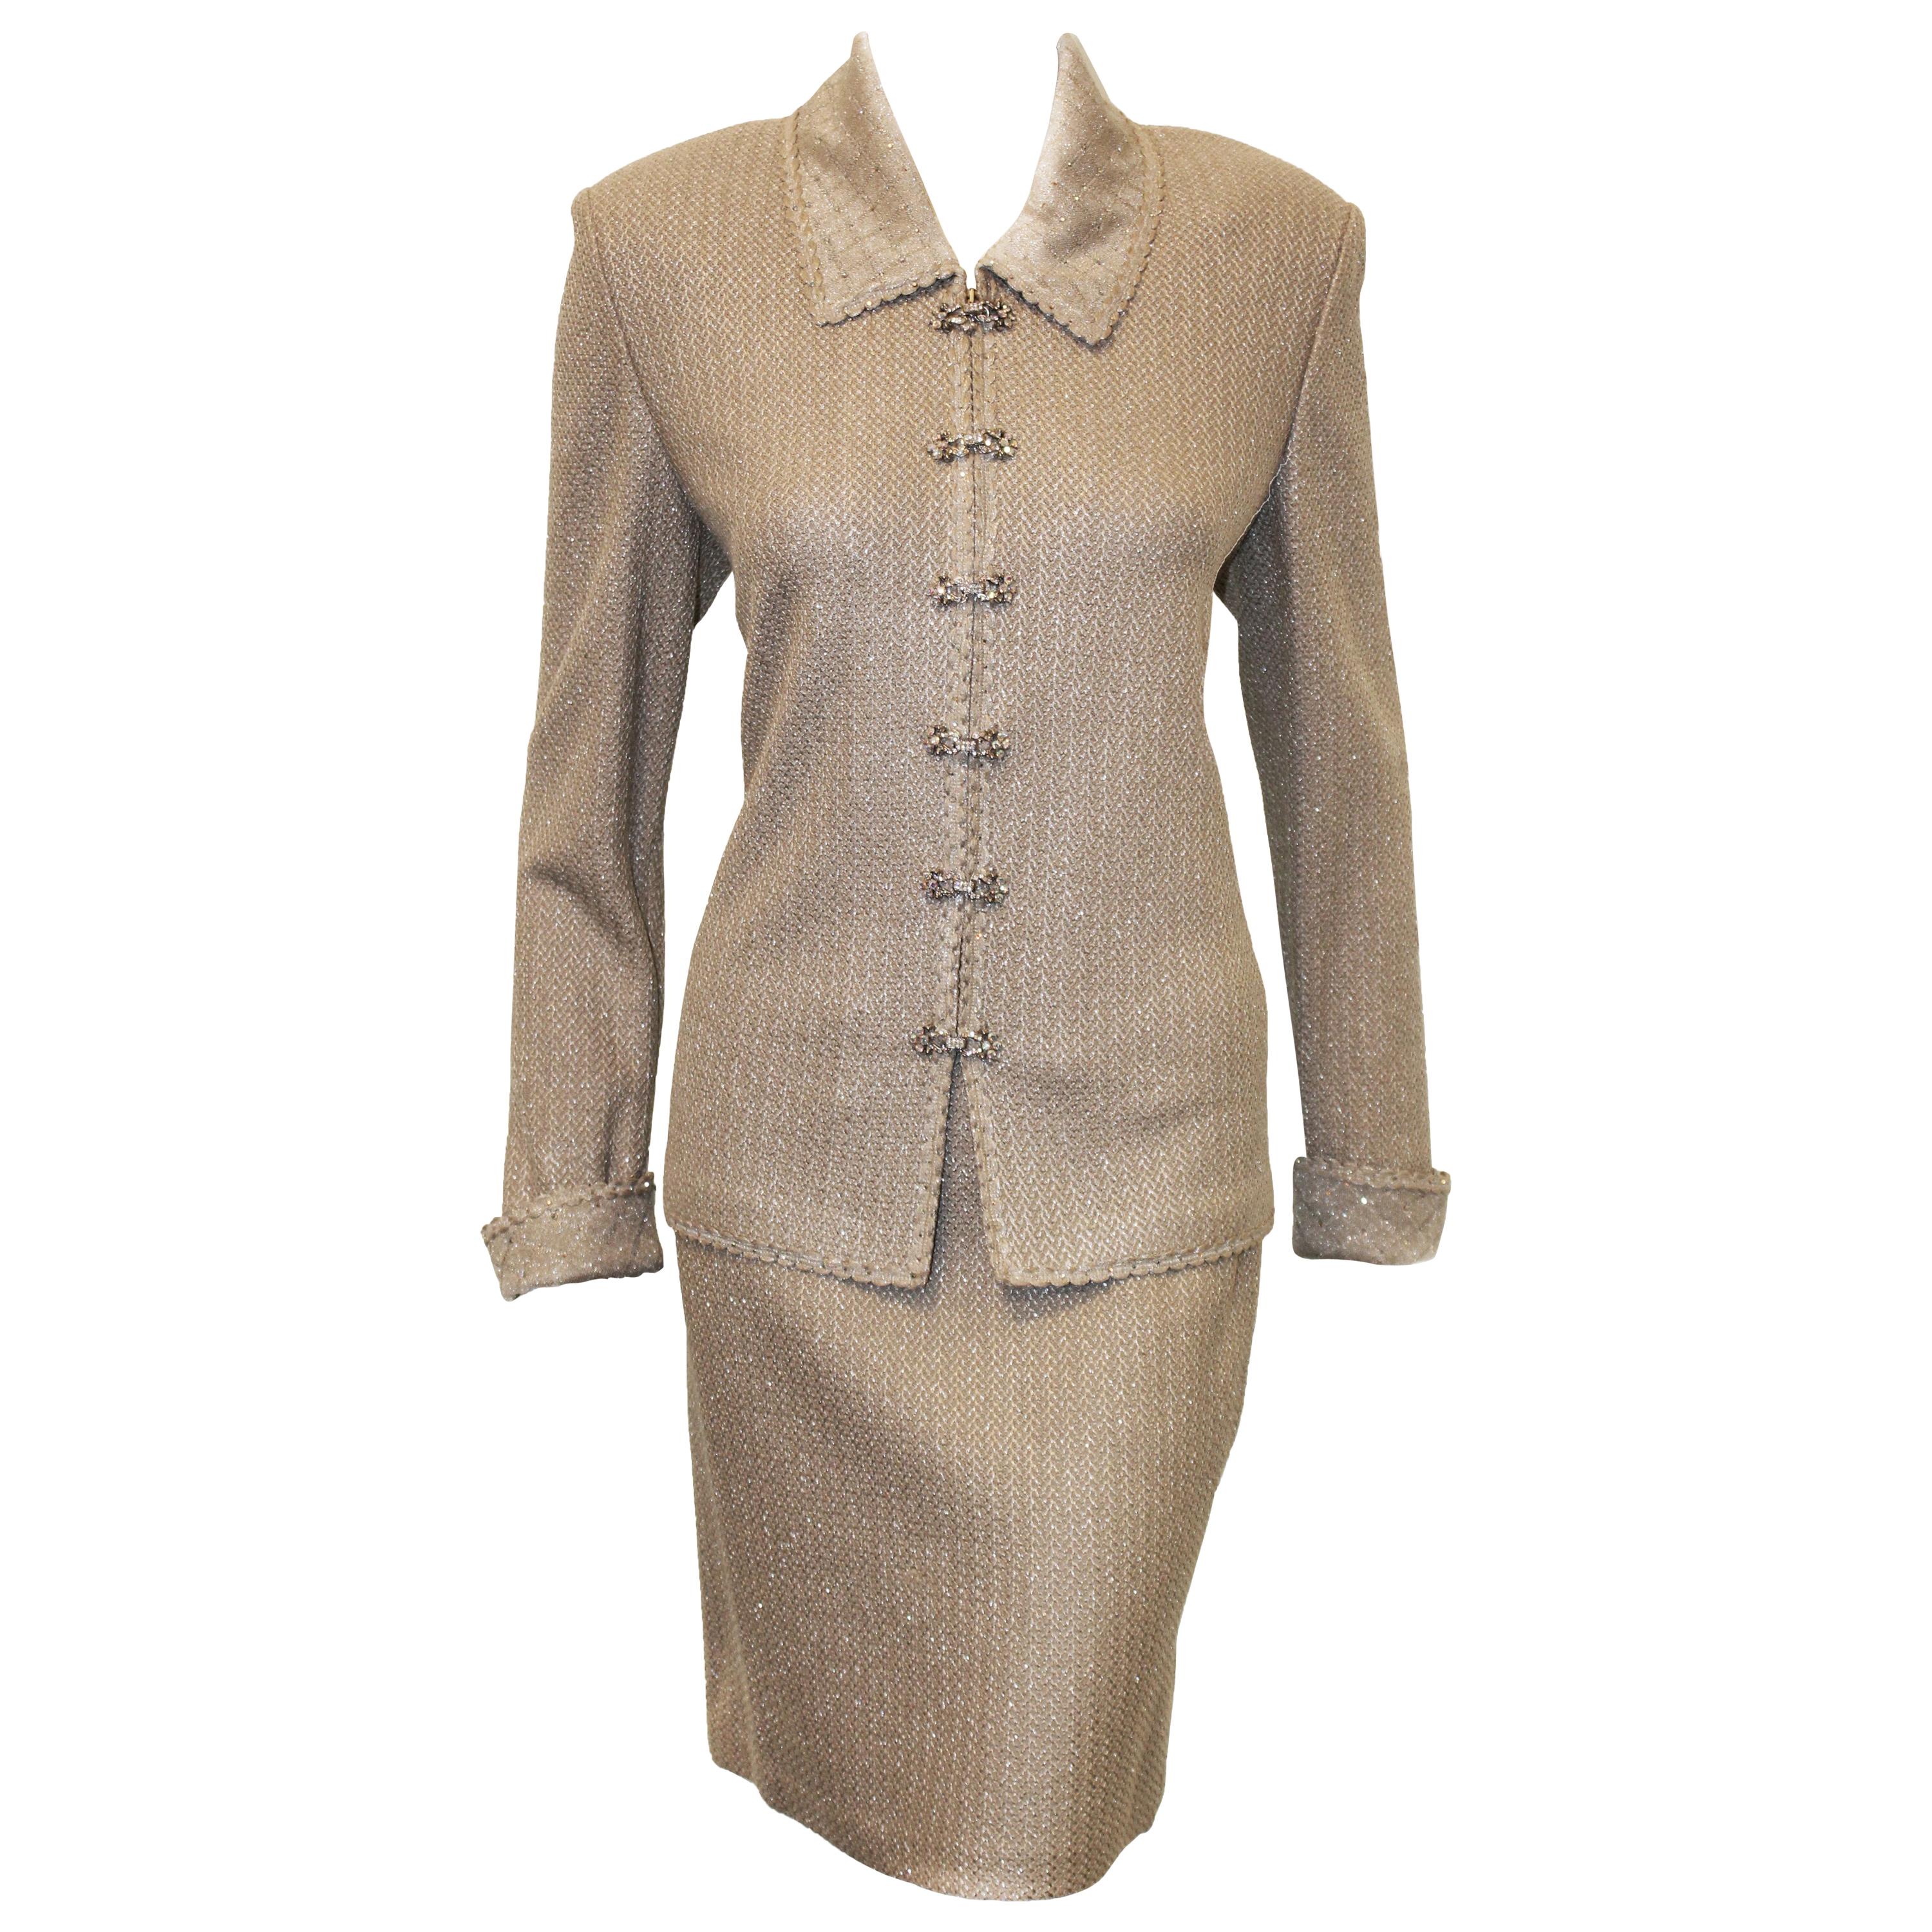 St. John Evening Silver Skirt Suit with Rhinestone Closures